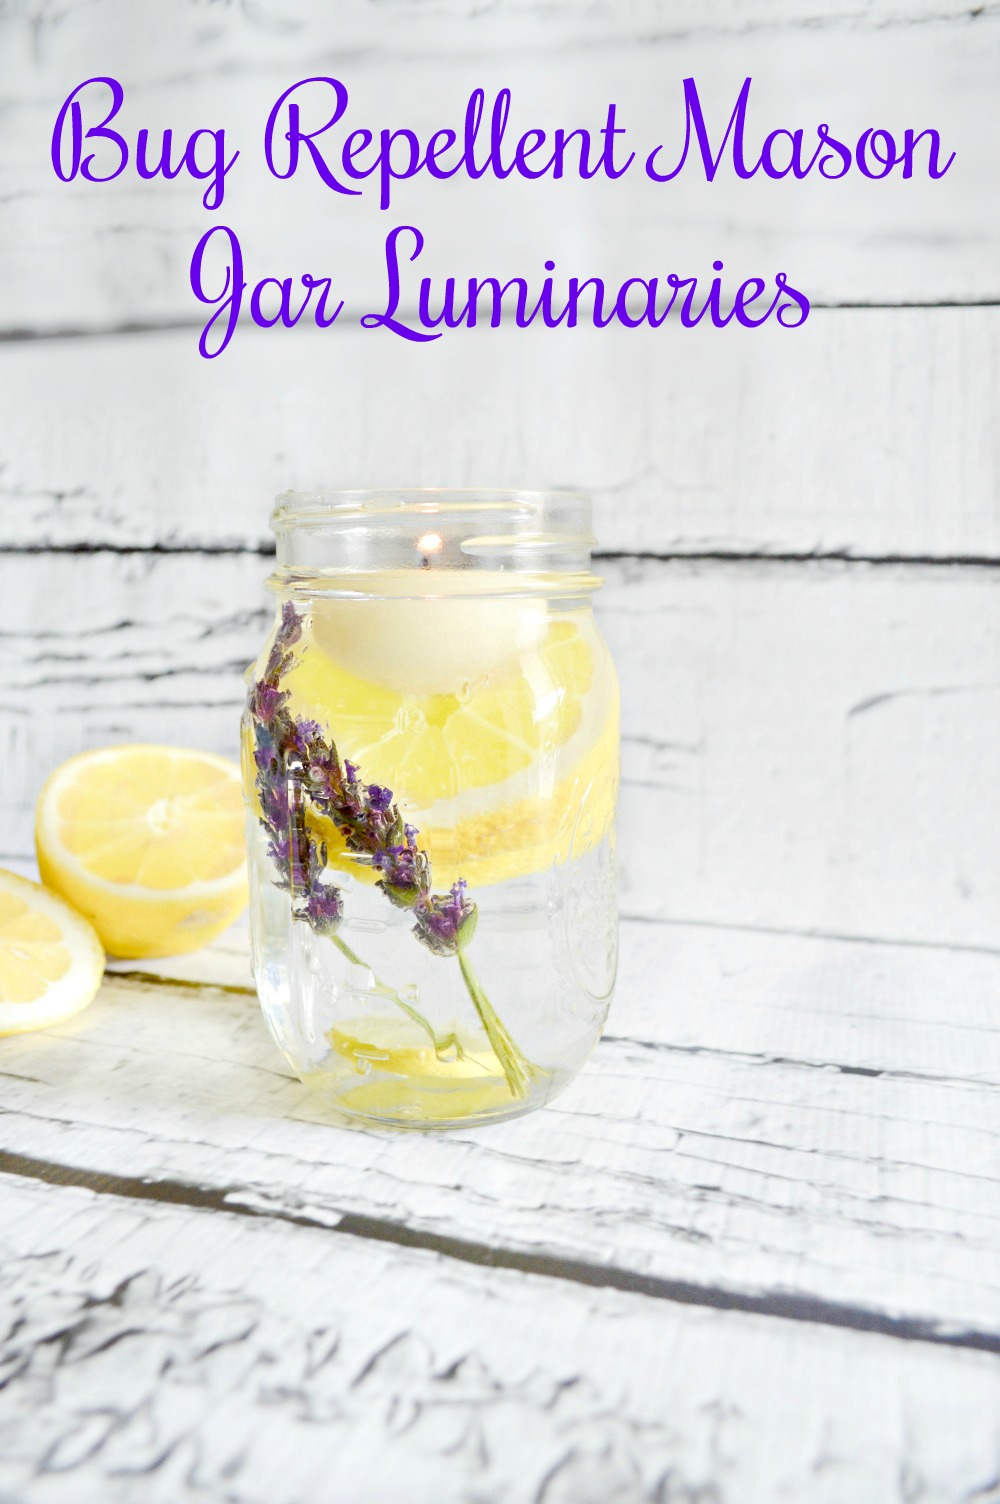 Learn how to make Bug Repellent Mason Jar Luminaries using herbs from the garden and essential oils